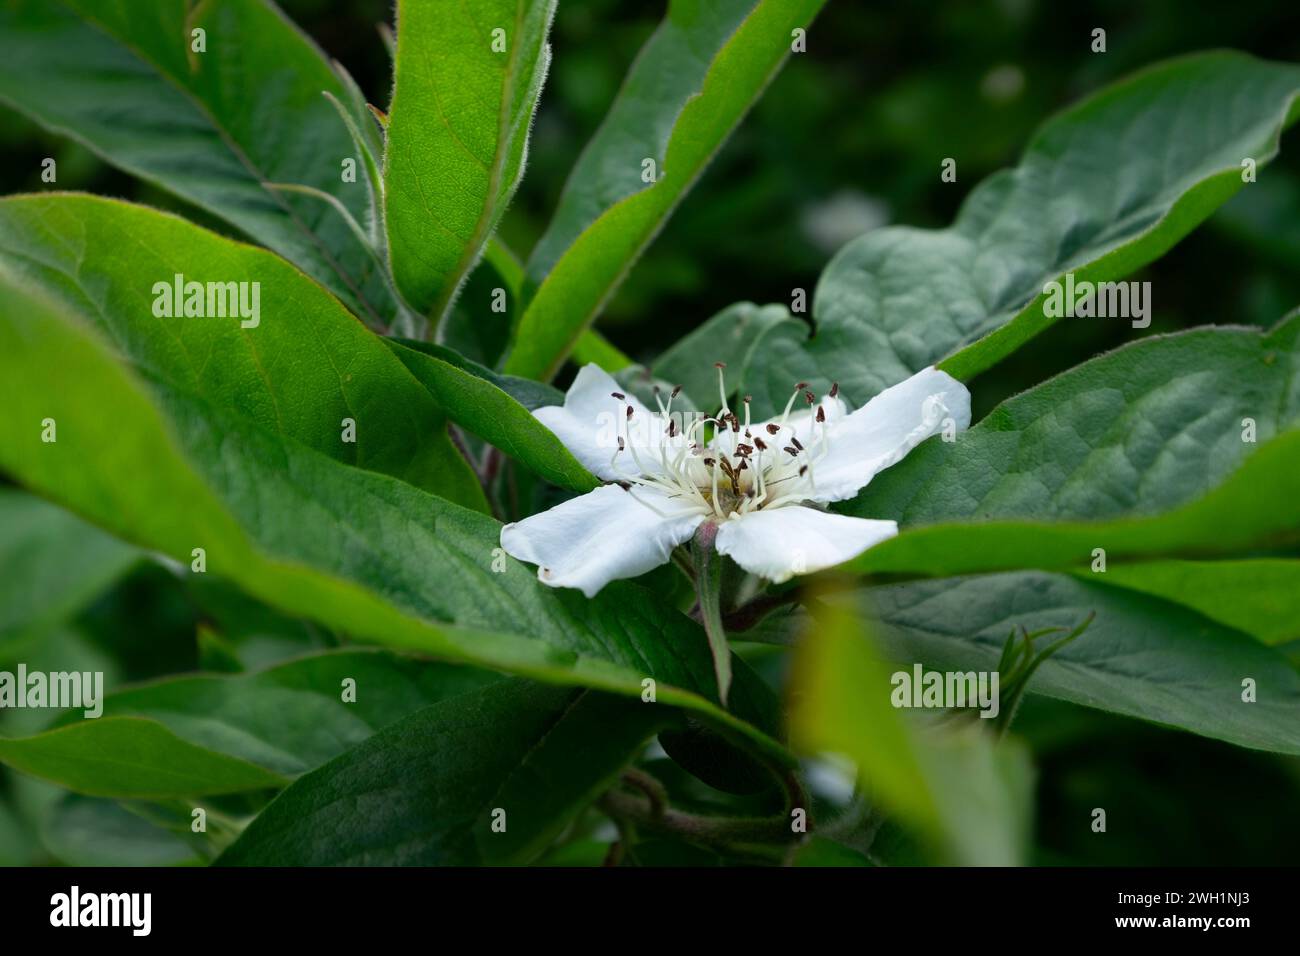 White flower and leaves of the Common Medlar or Mespilus germanica Stock Photo